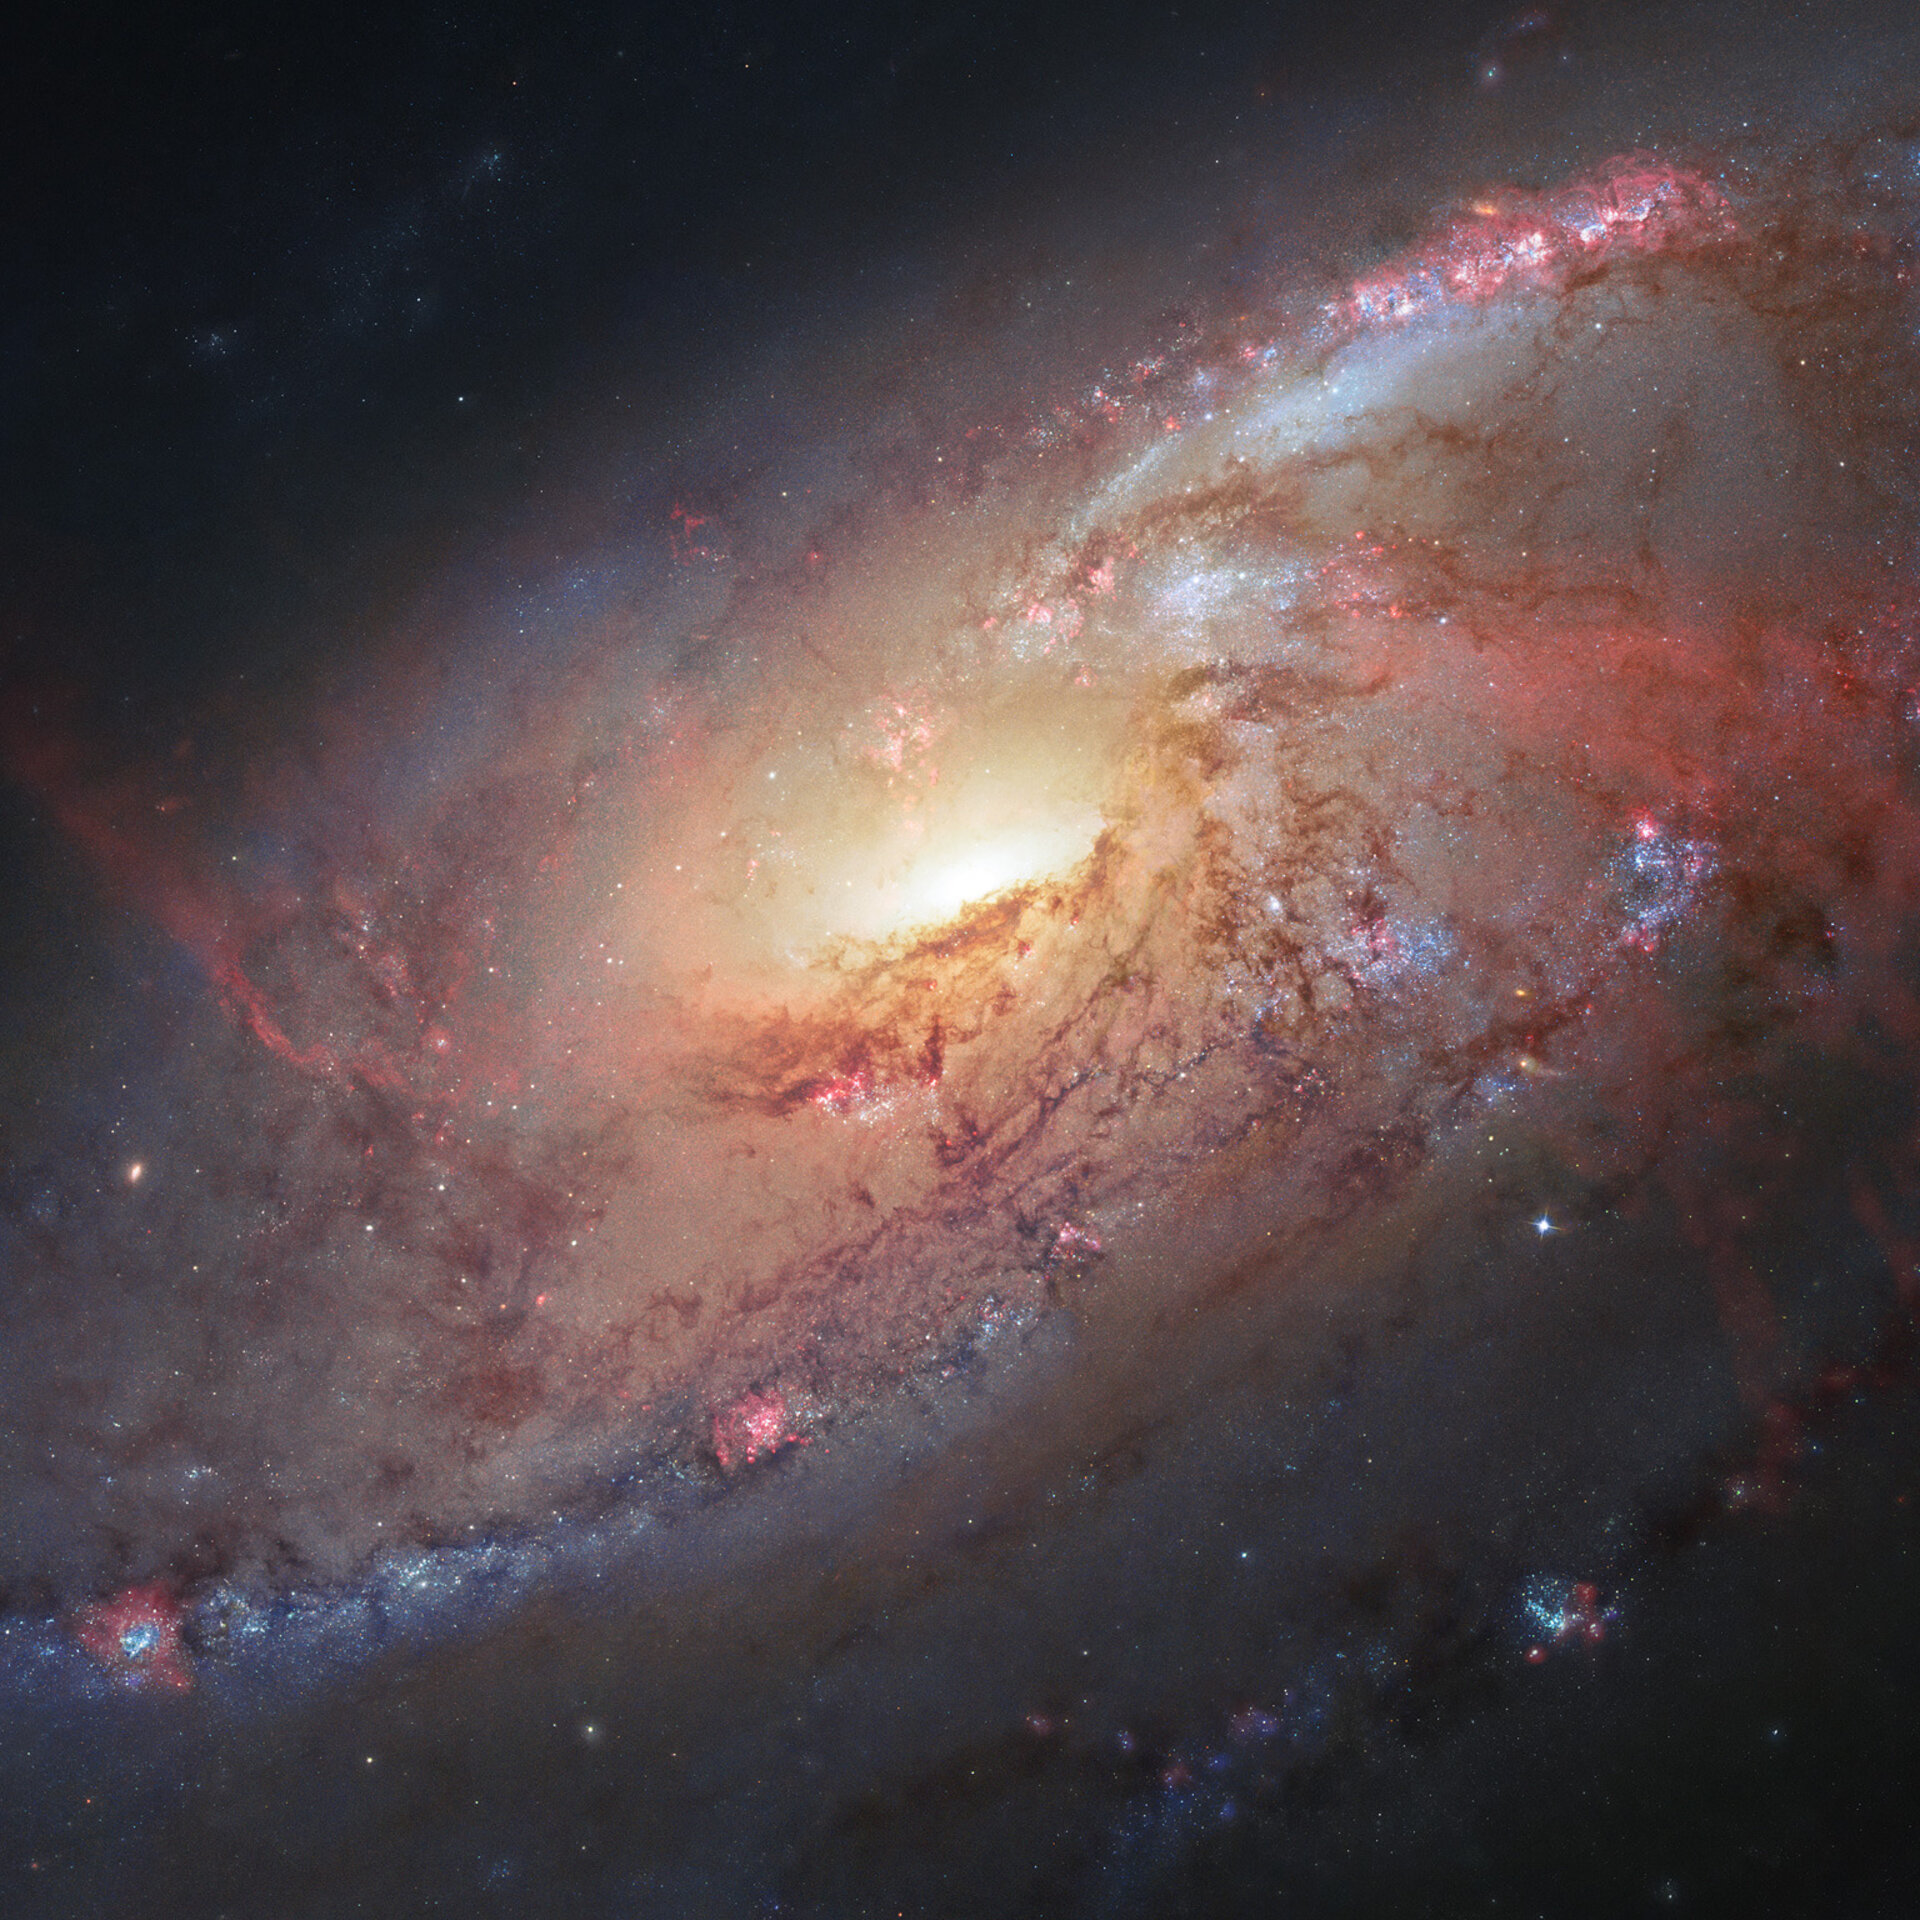 Hubble view of M 106